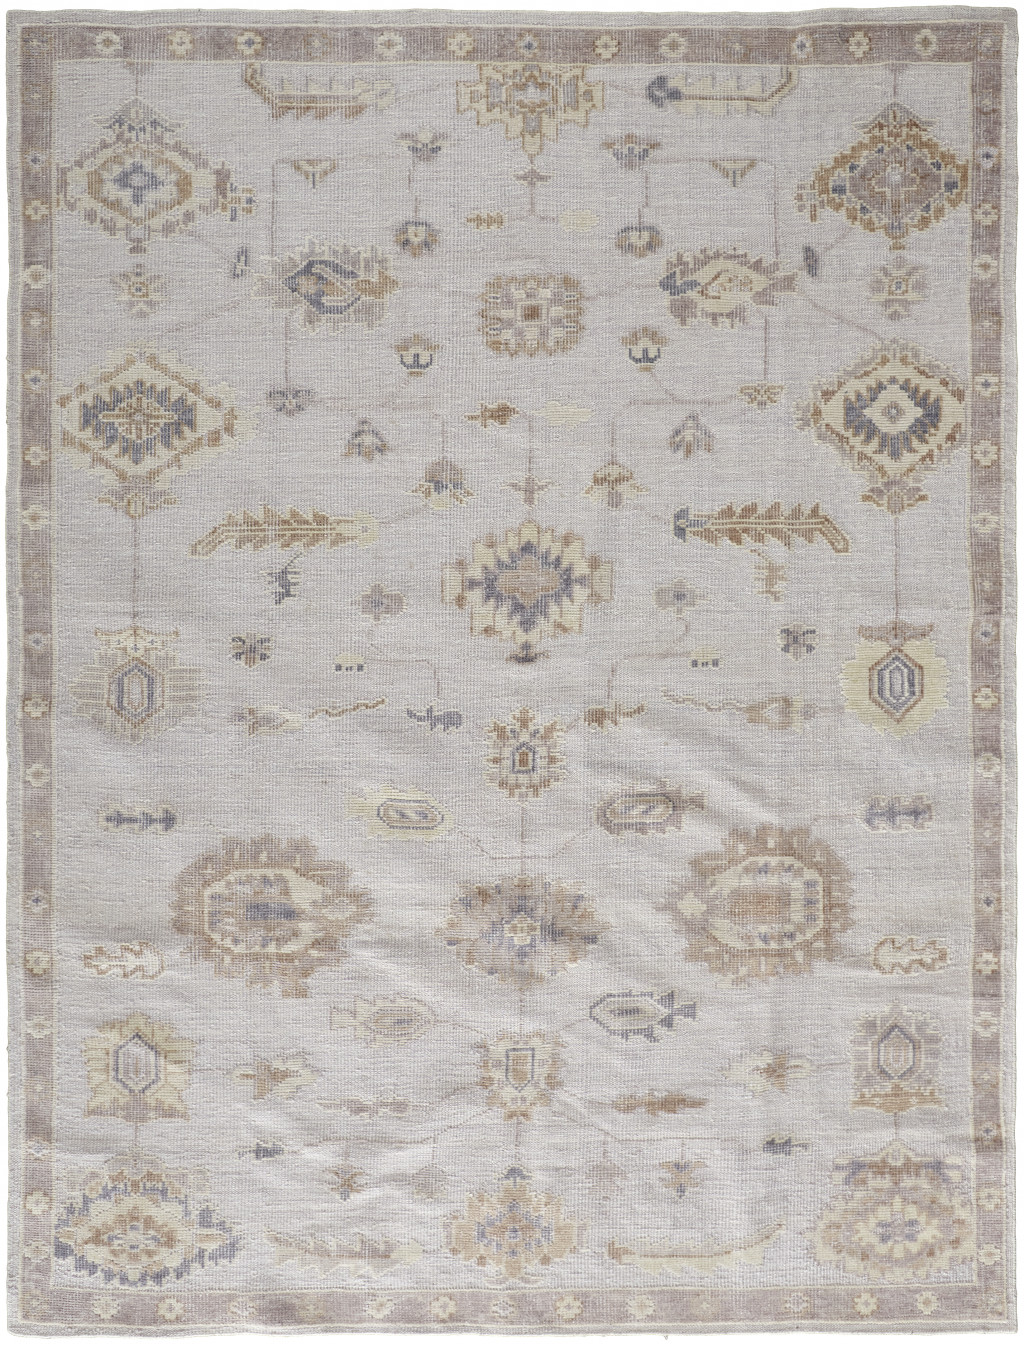 8' X 10' Ivory And Orange Floral Hand Knotted Stain Resistant Area Rug-514972-1